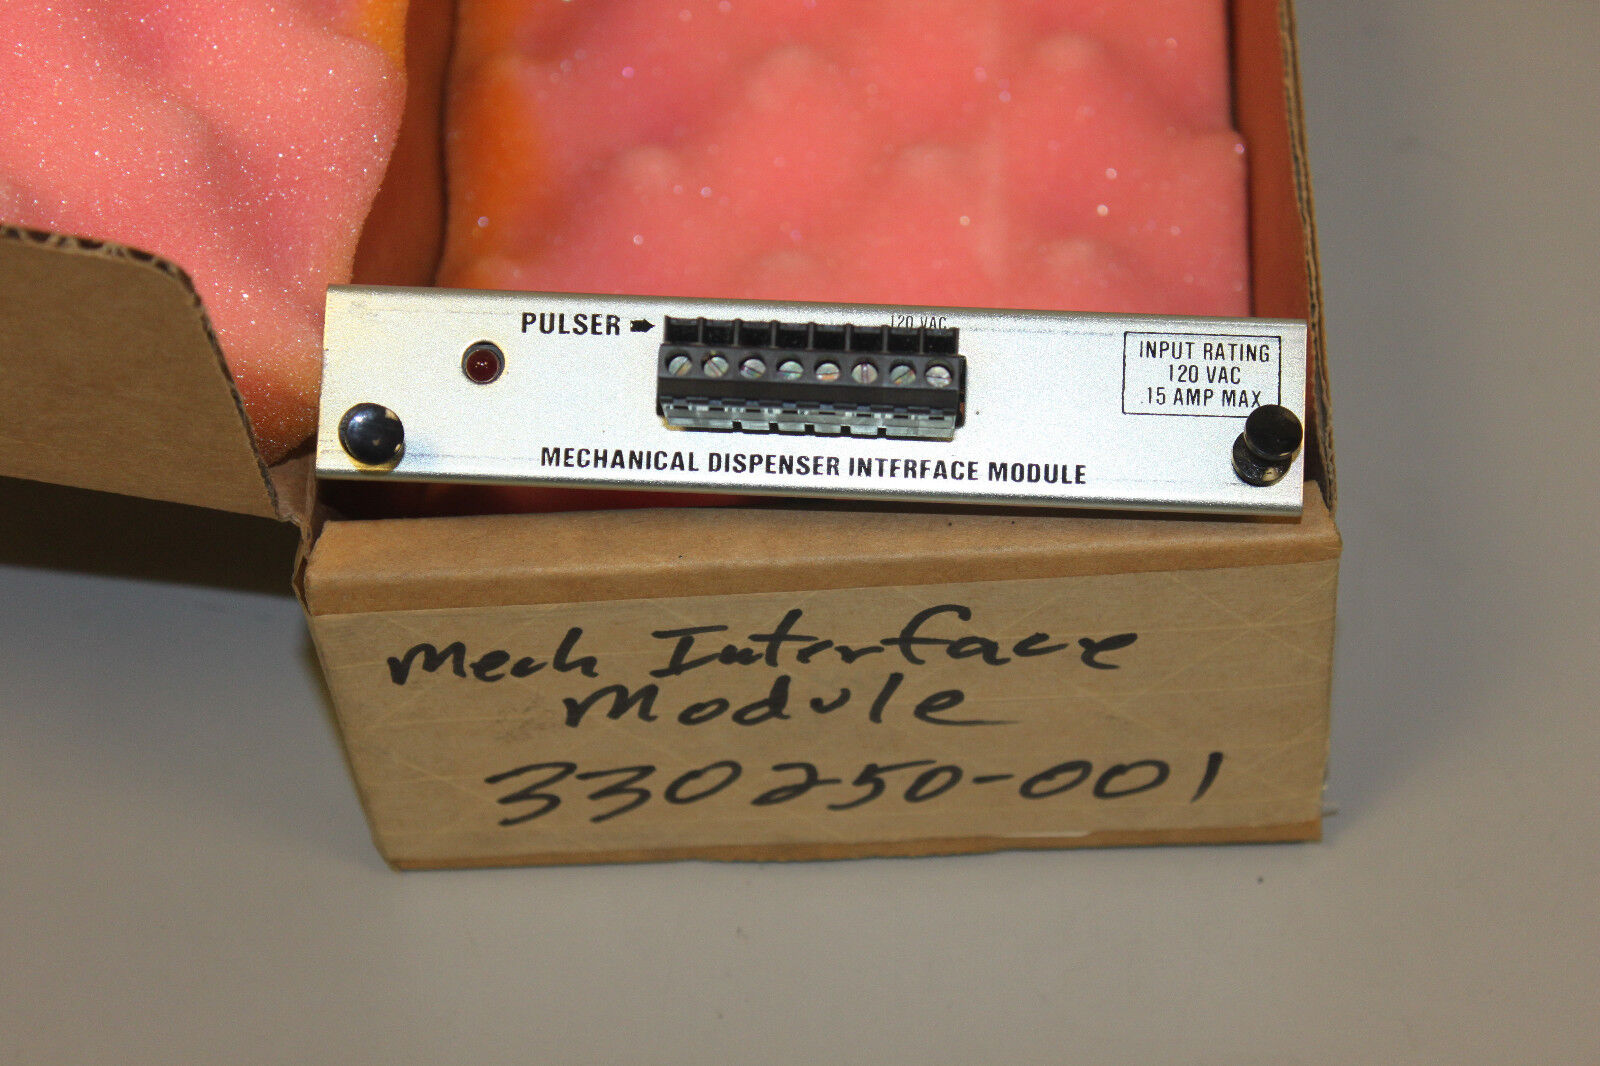 Veeder-Root 330250-001 Mechanical Interface Module for TLS-350R